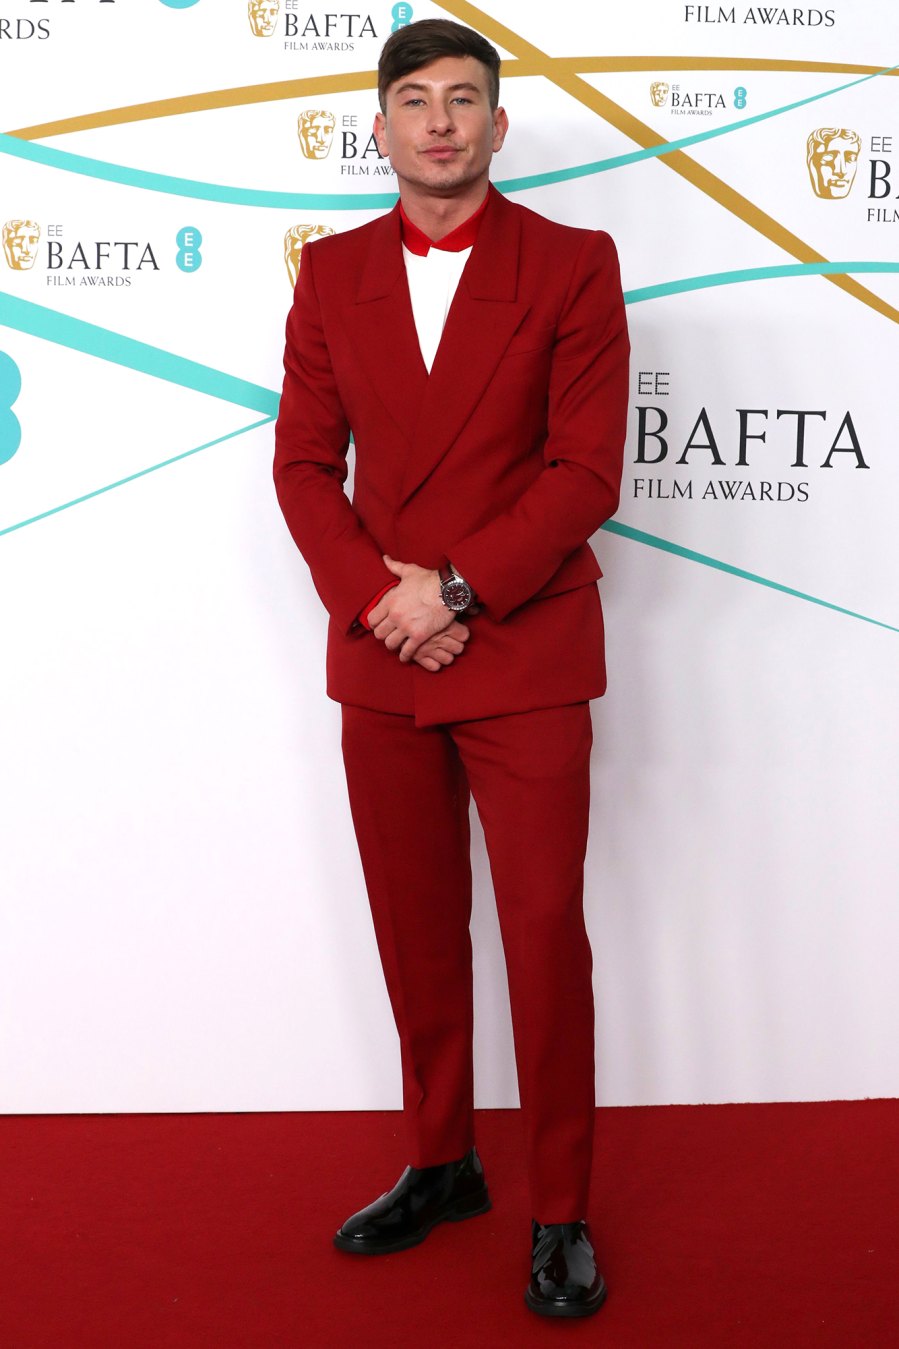 British Academy Film Awards 2023 Red Carpet: See What the Stars Wore